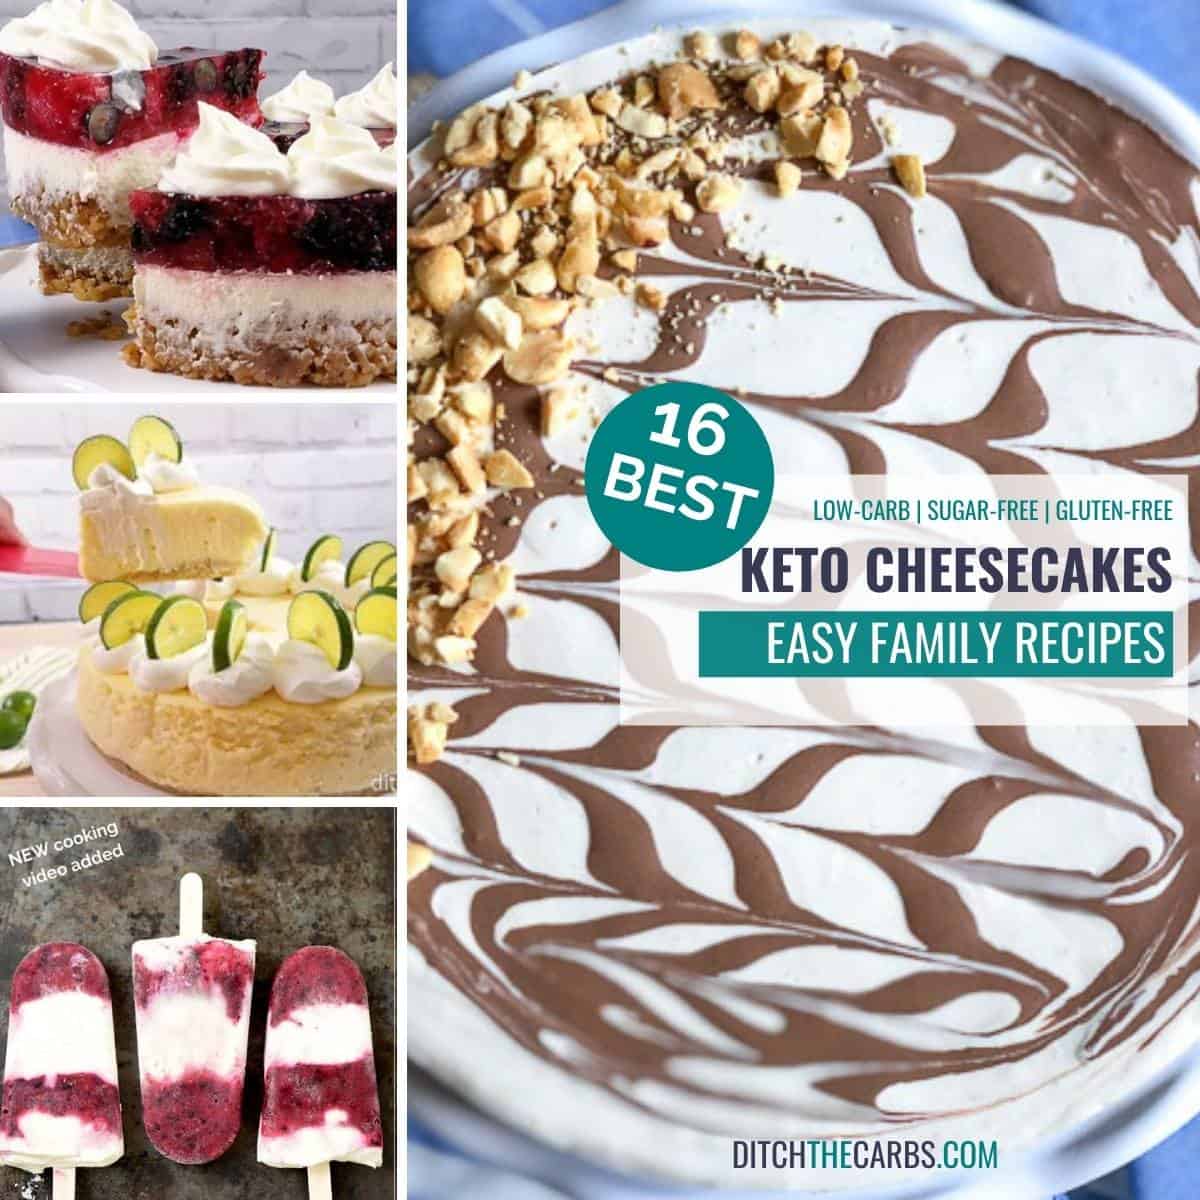 The 16 Best Keto Cheesecake Recipes (in 2021)